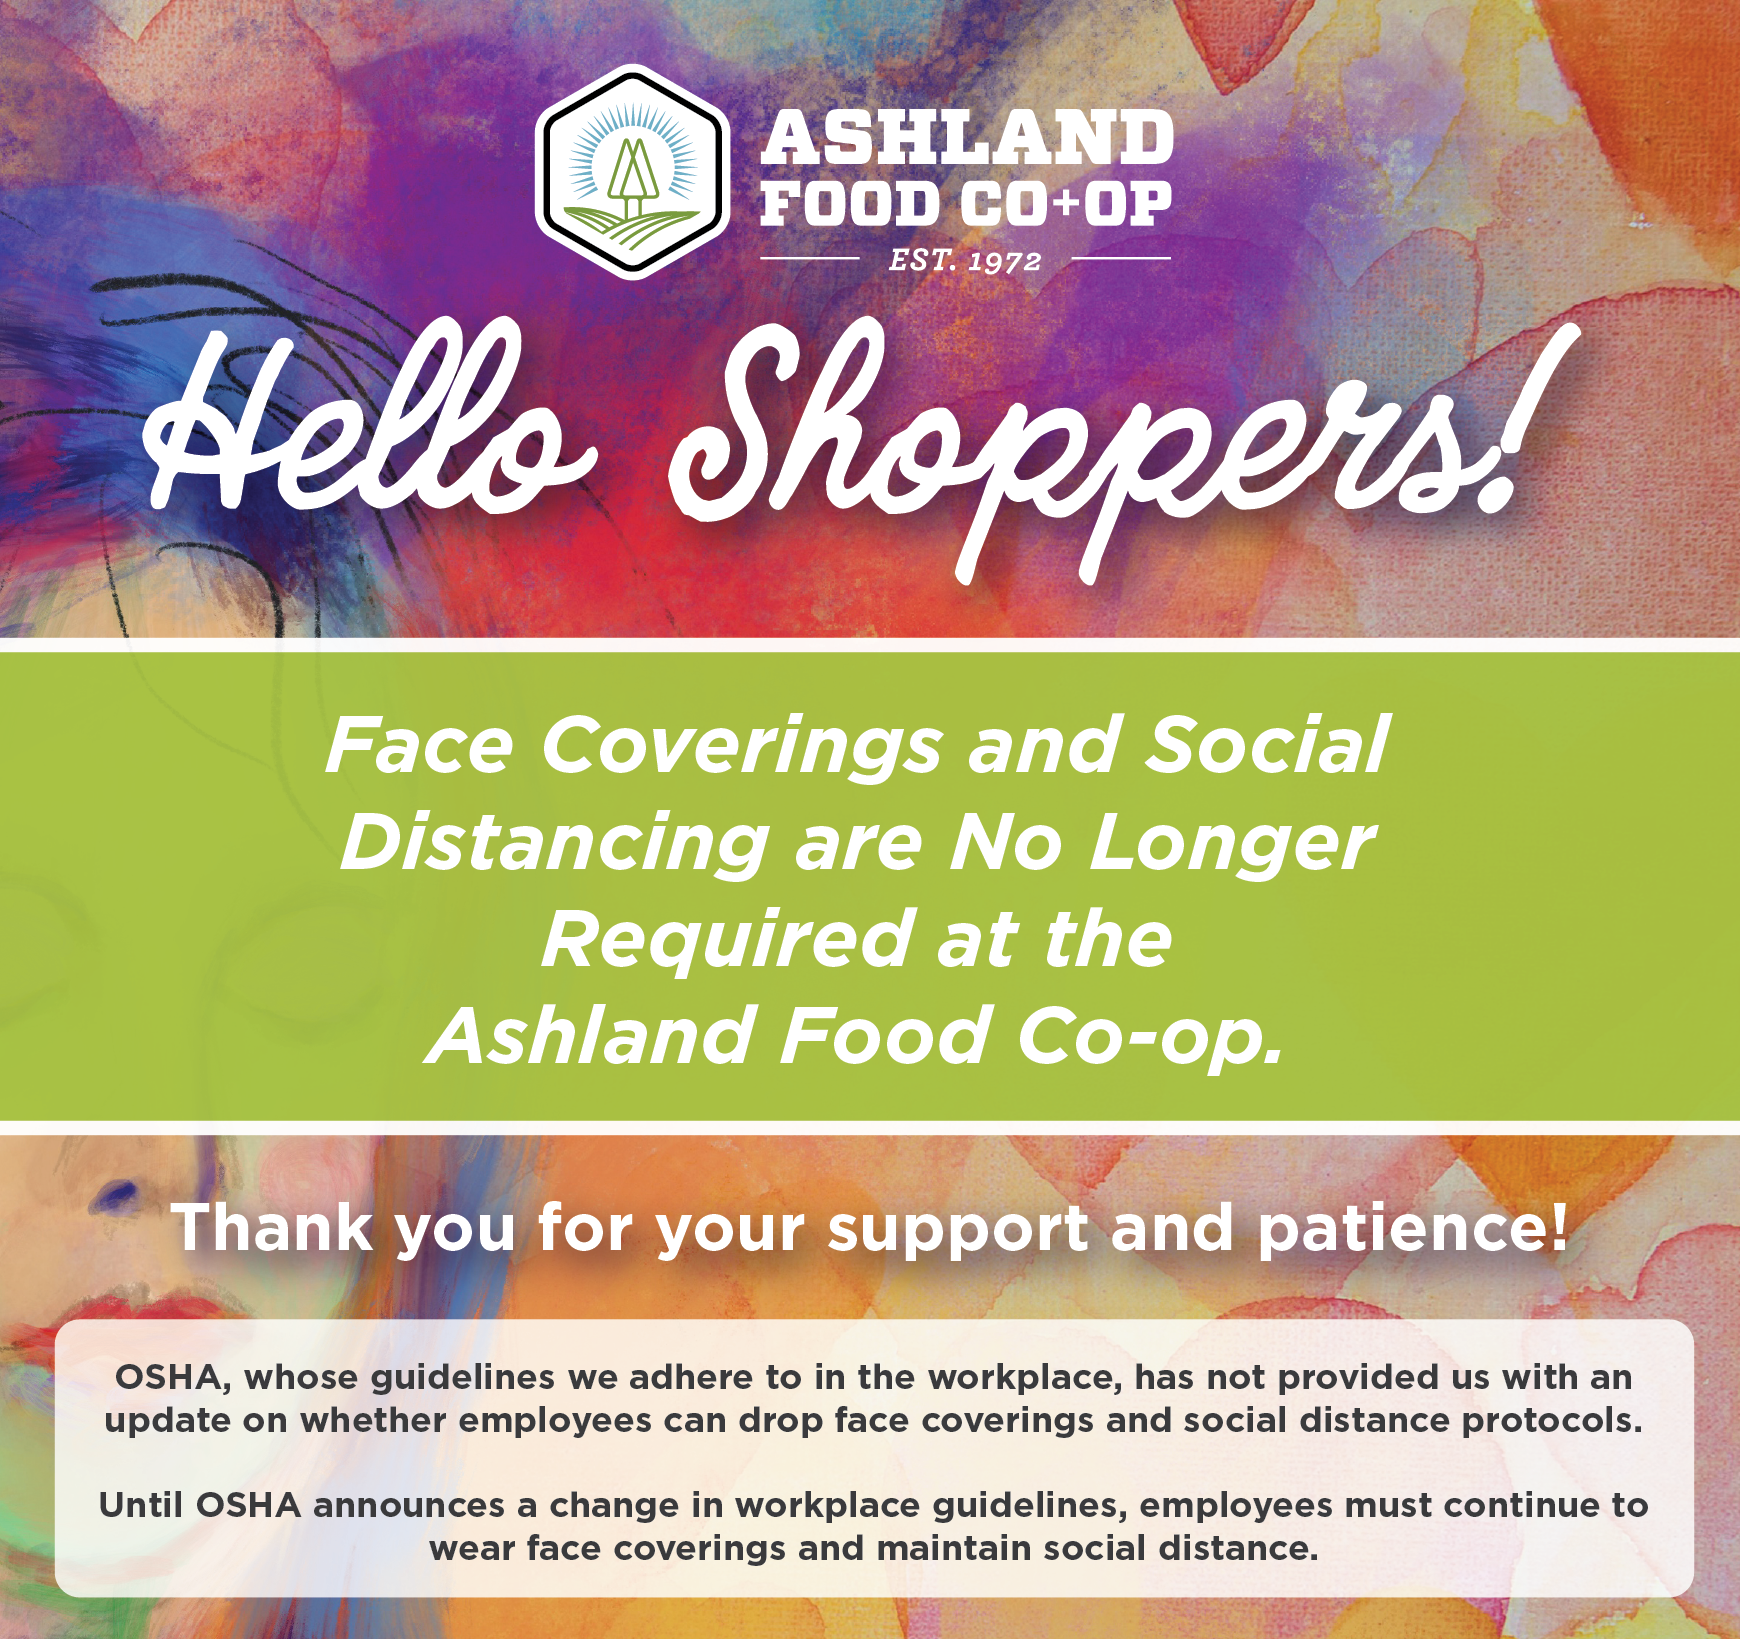 Face coverings and social distancing are no longer required at the Ashland Food Co-op. Thank you for your support and patience! Until OSHA announces a change in workplace guidelines, employees must continue to wear face coverings and maintain social distance.